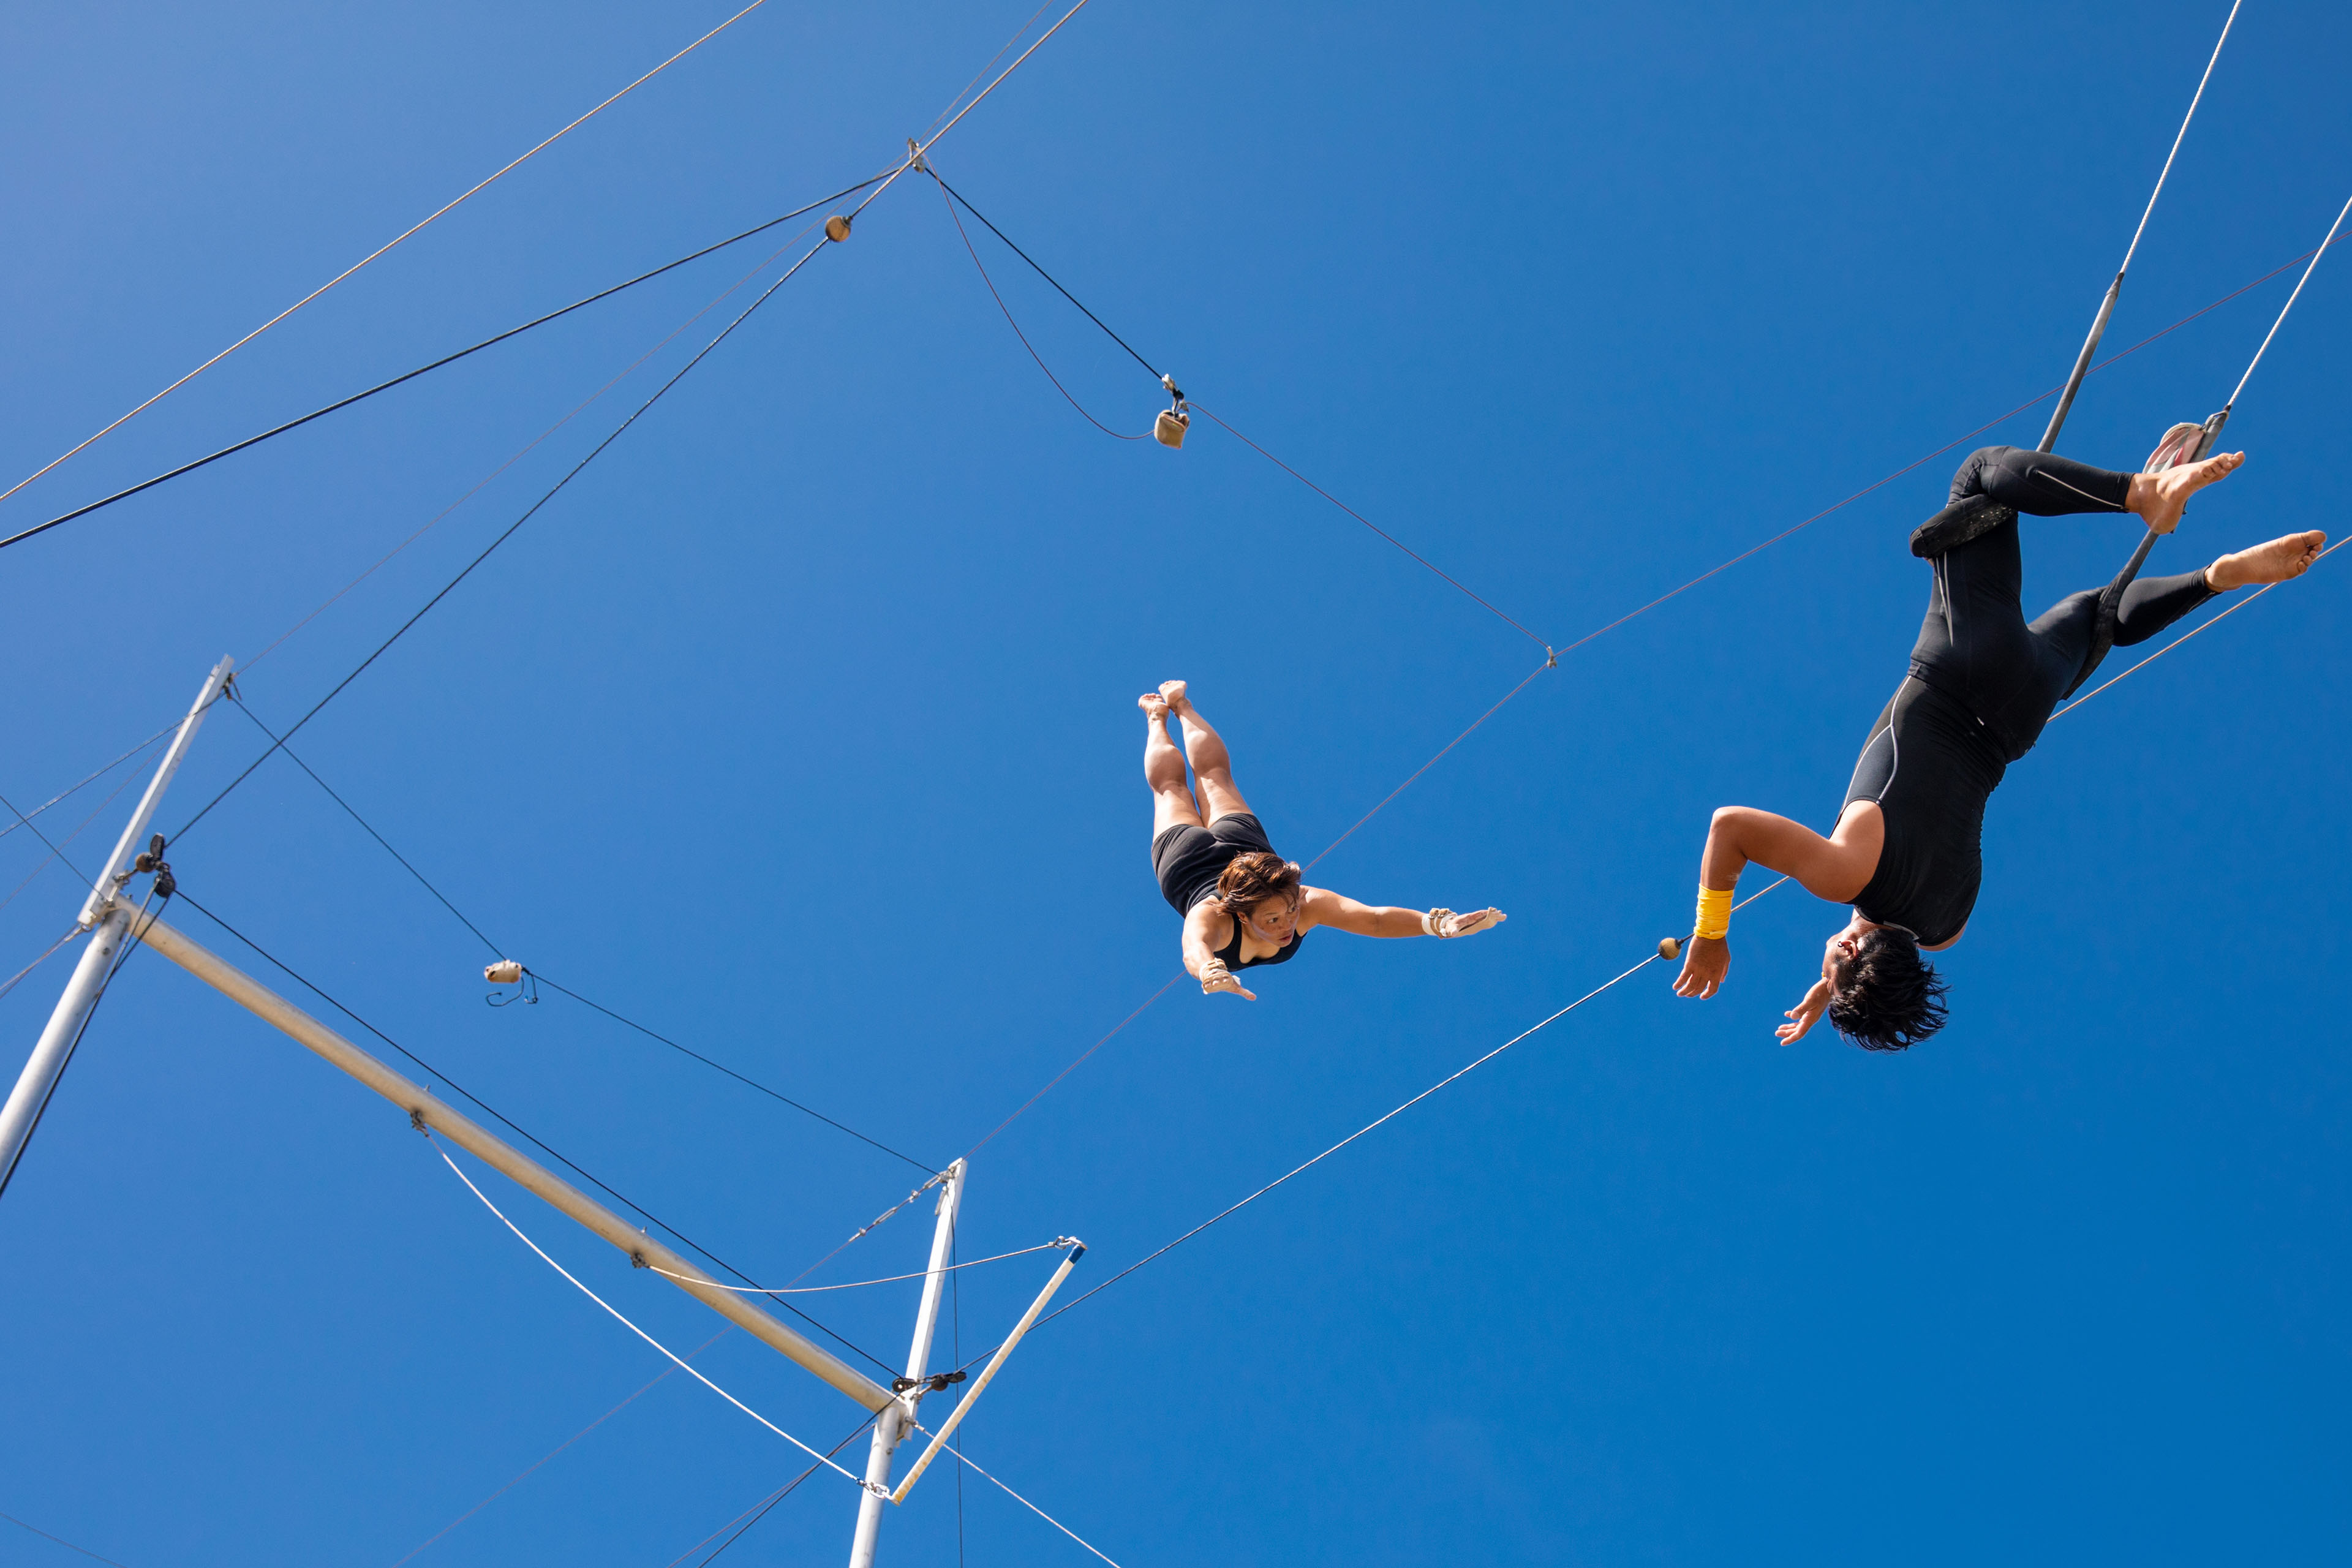 Trapeze artists practicing against the blue sky